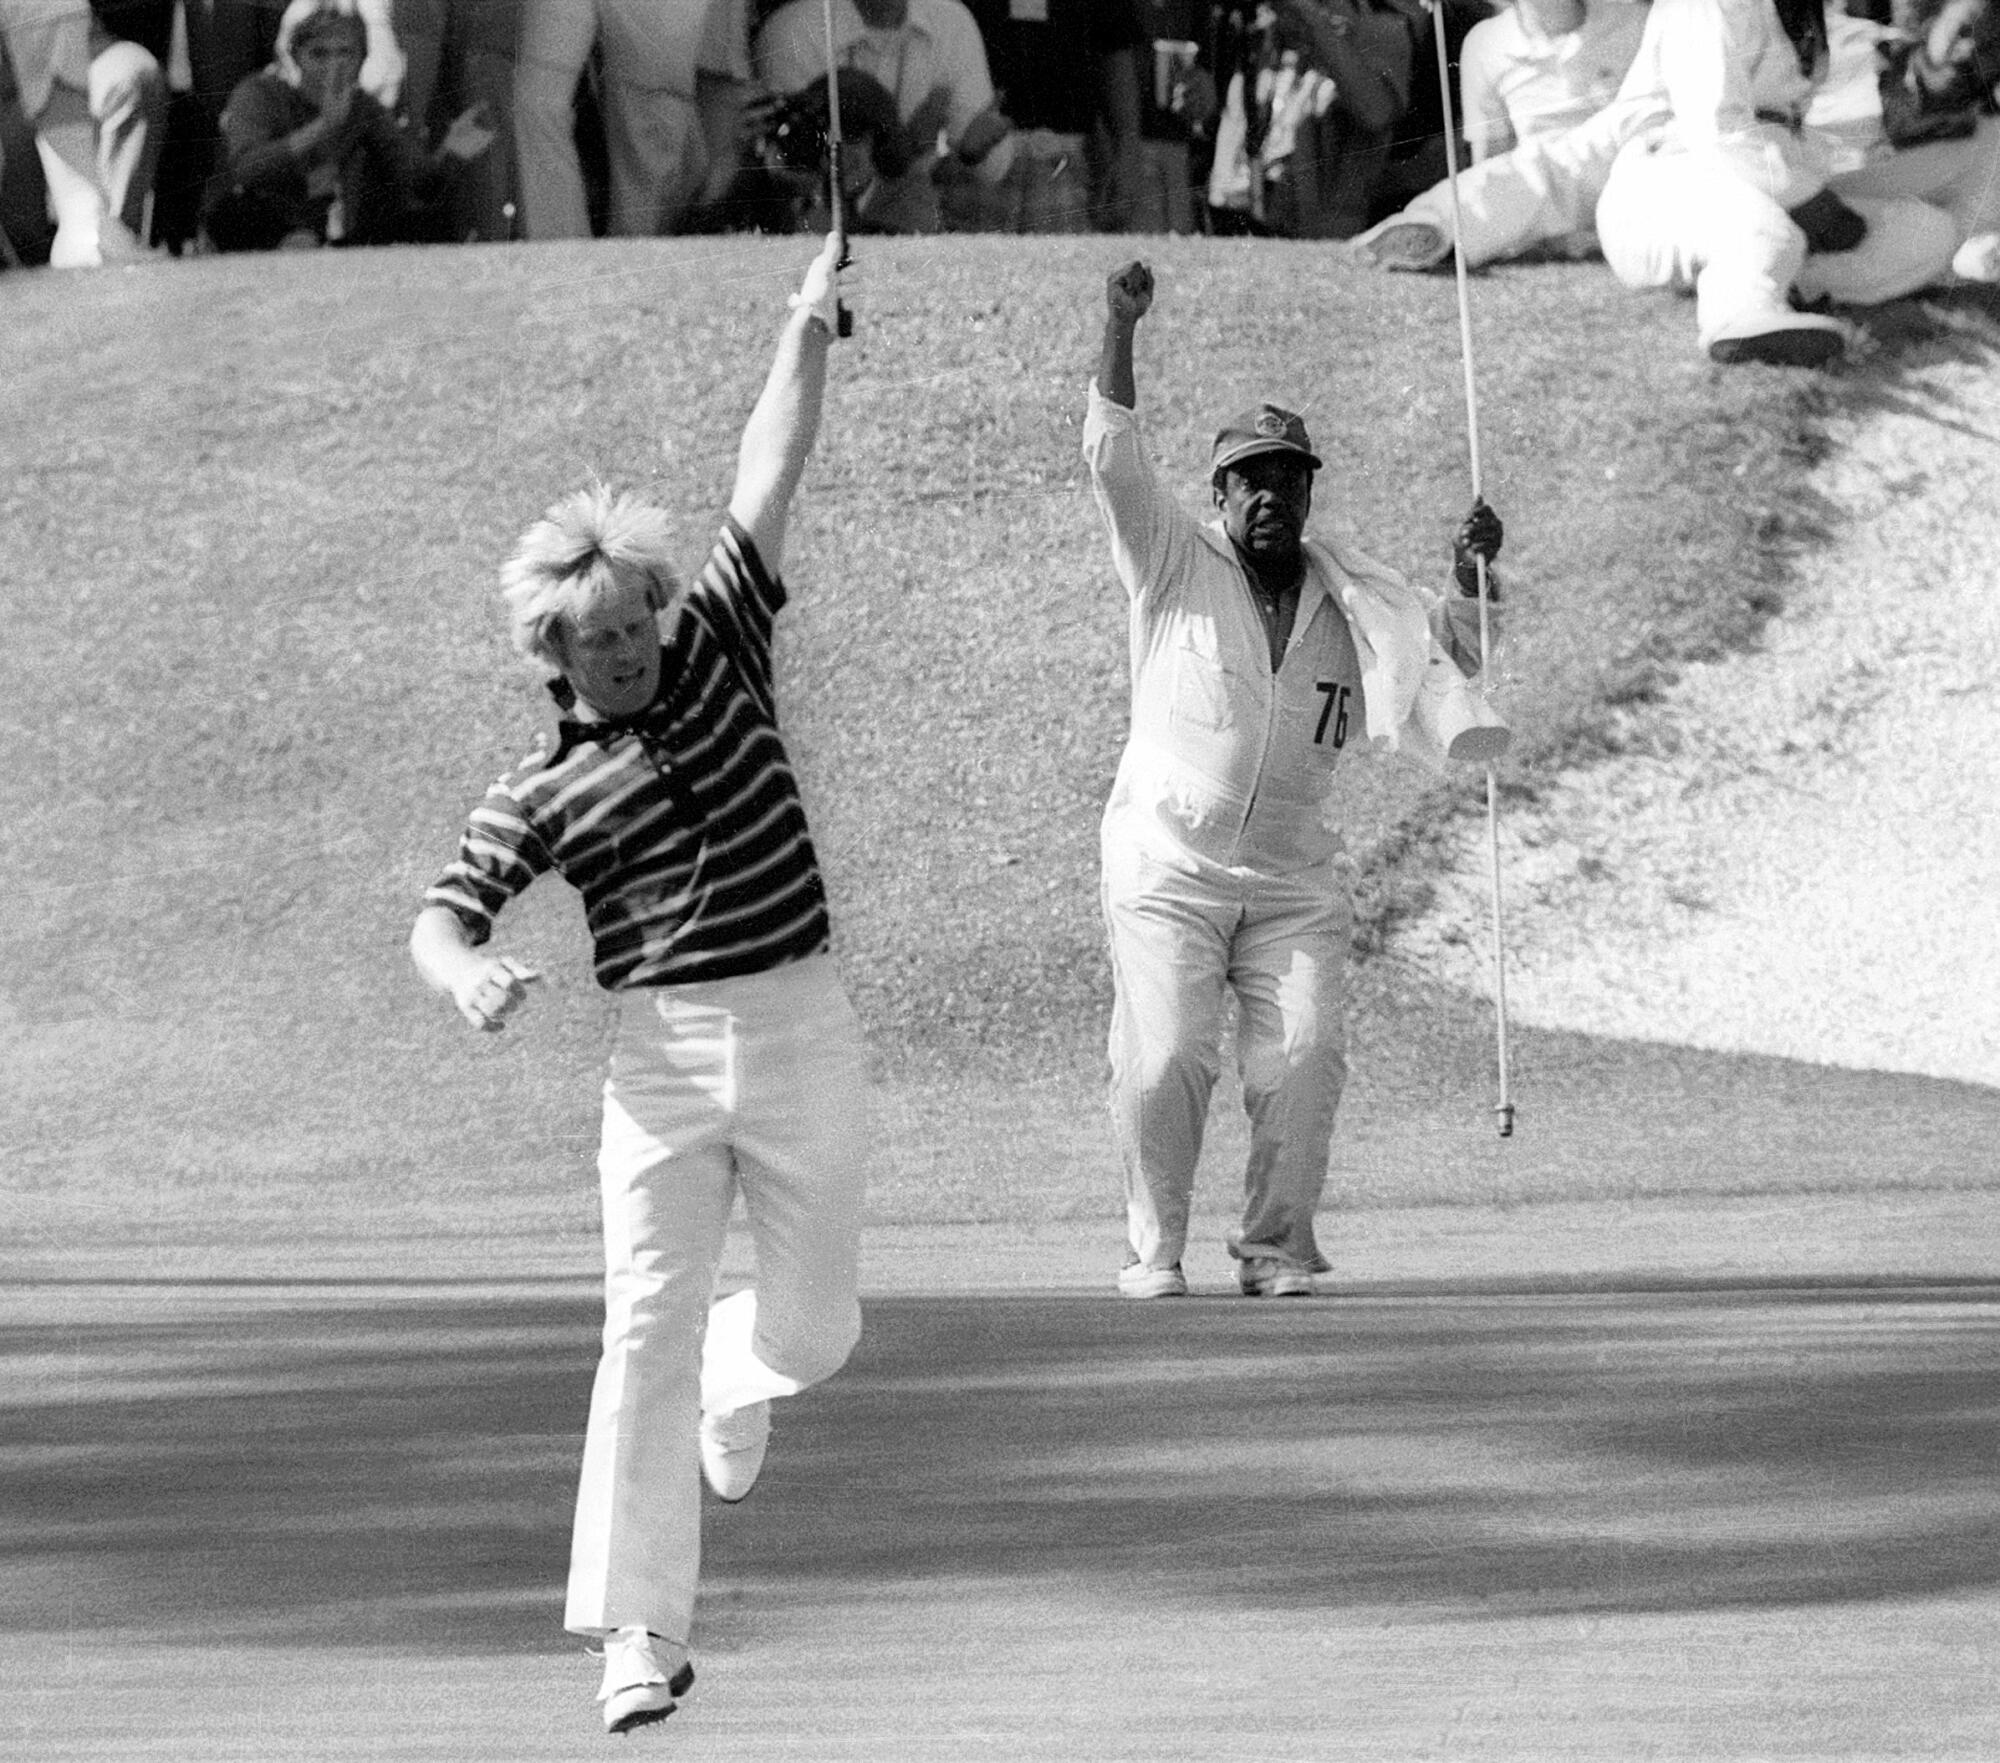  Jack Nicklaus and his caddie, Willie Peterson, celebrate a birdie putt on the 16th hole.